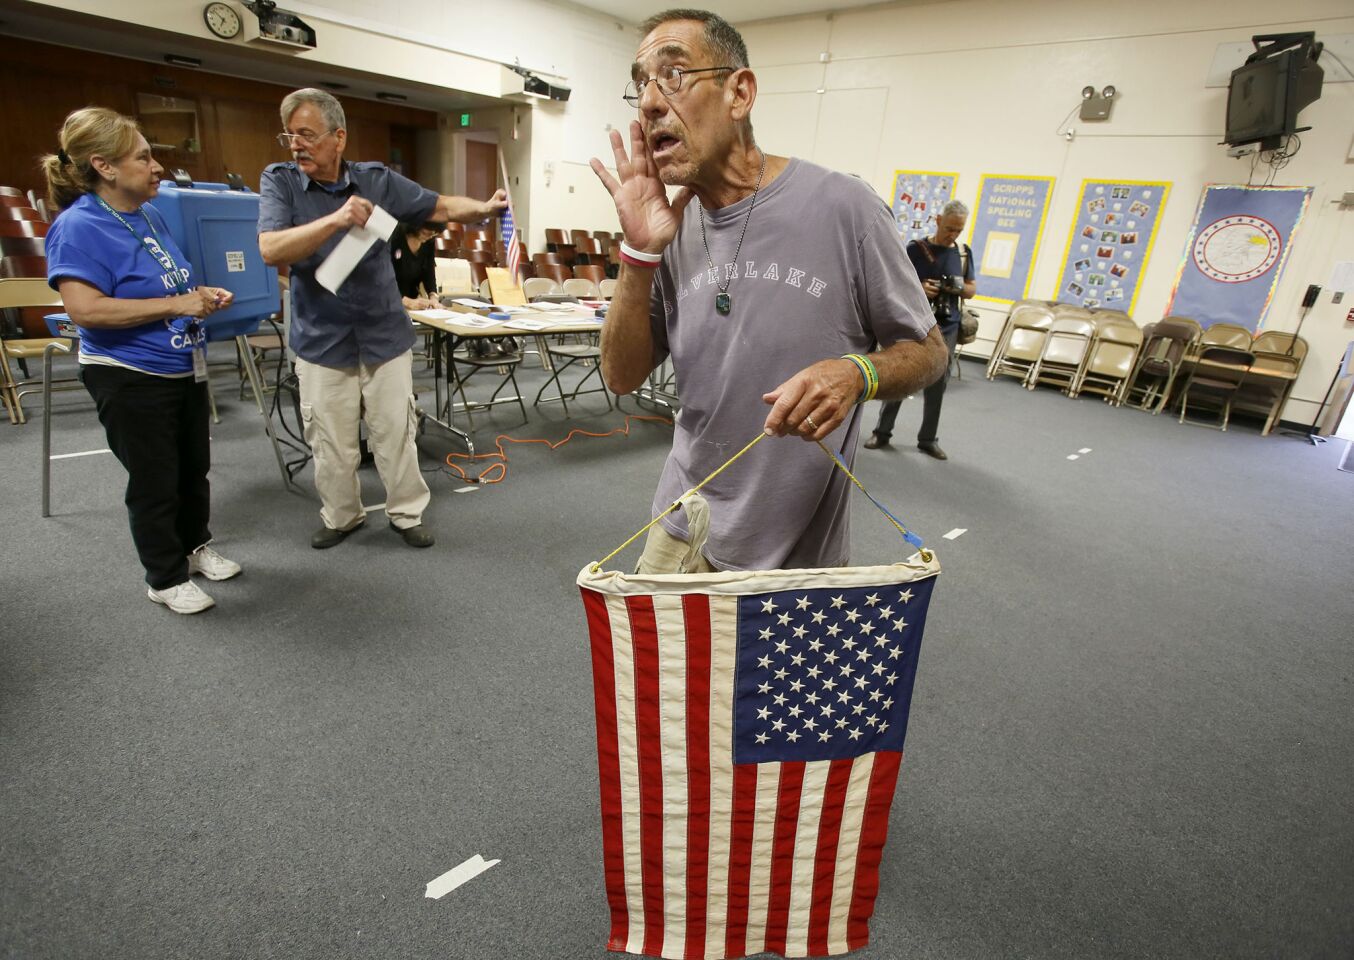 Where to hang the flag? Poll workers Esperanza Gaytan, left, Mathew Klempa and Barry Copilow, holding the flag, try to decide on the right spot at Allesandro Elementary School in Silver Lake.